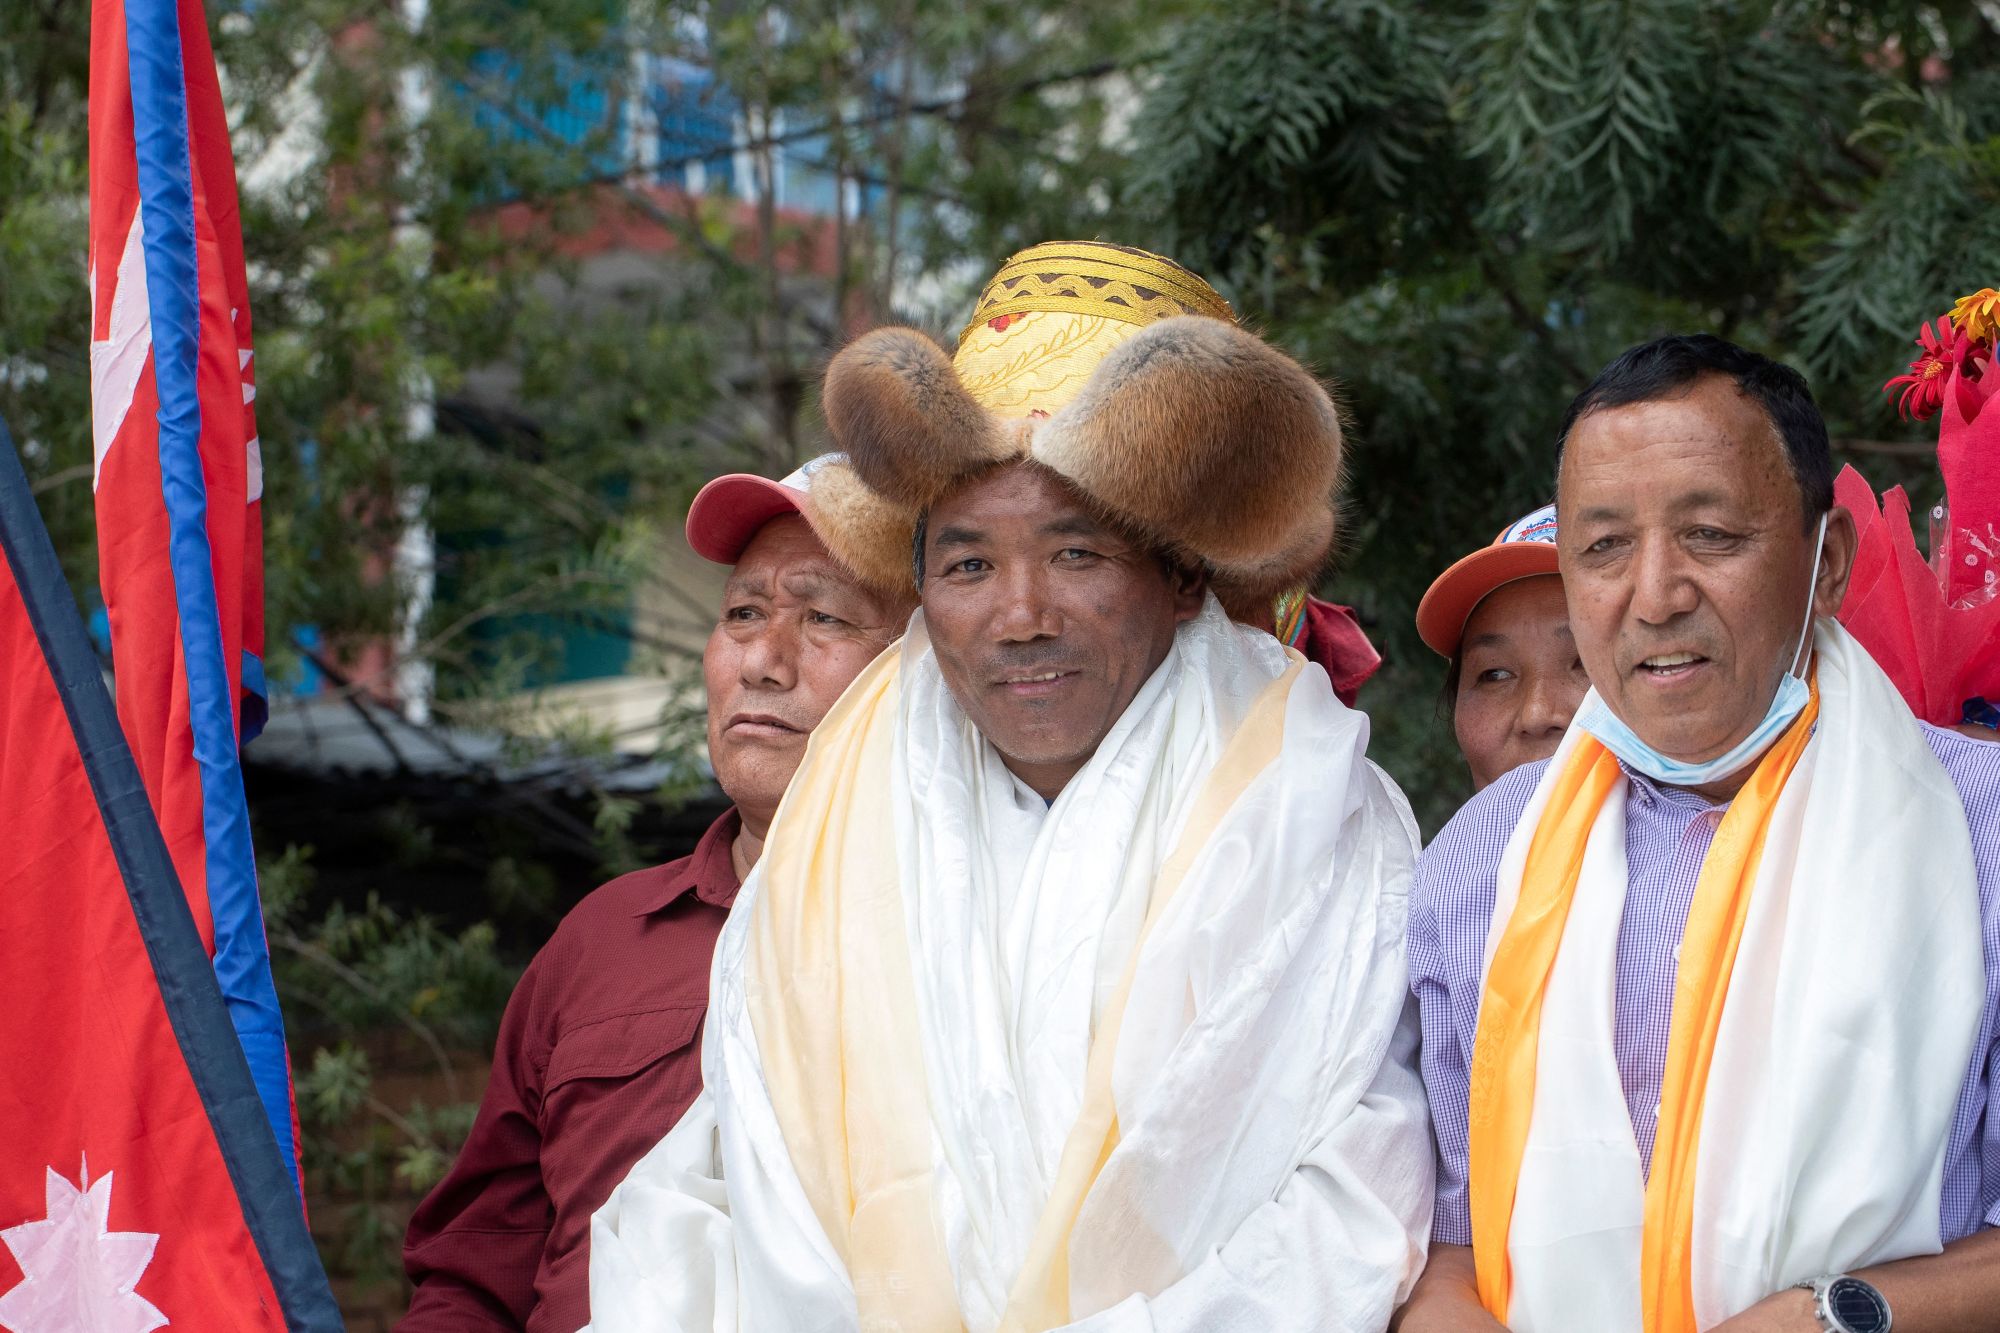 Nepali mountaineer Kami Rita Sherpa (C), who broke his own world record for the most summits after climbing Mount Everest for the 26th time, is welcomed after arriving at Tribhuvan airport in Kathmandu on May 27, 2022. (Photo by BIKASH KARKI / AFP) (Photo by BIKASH KARKI/AFP via Getty Images)